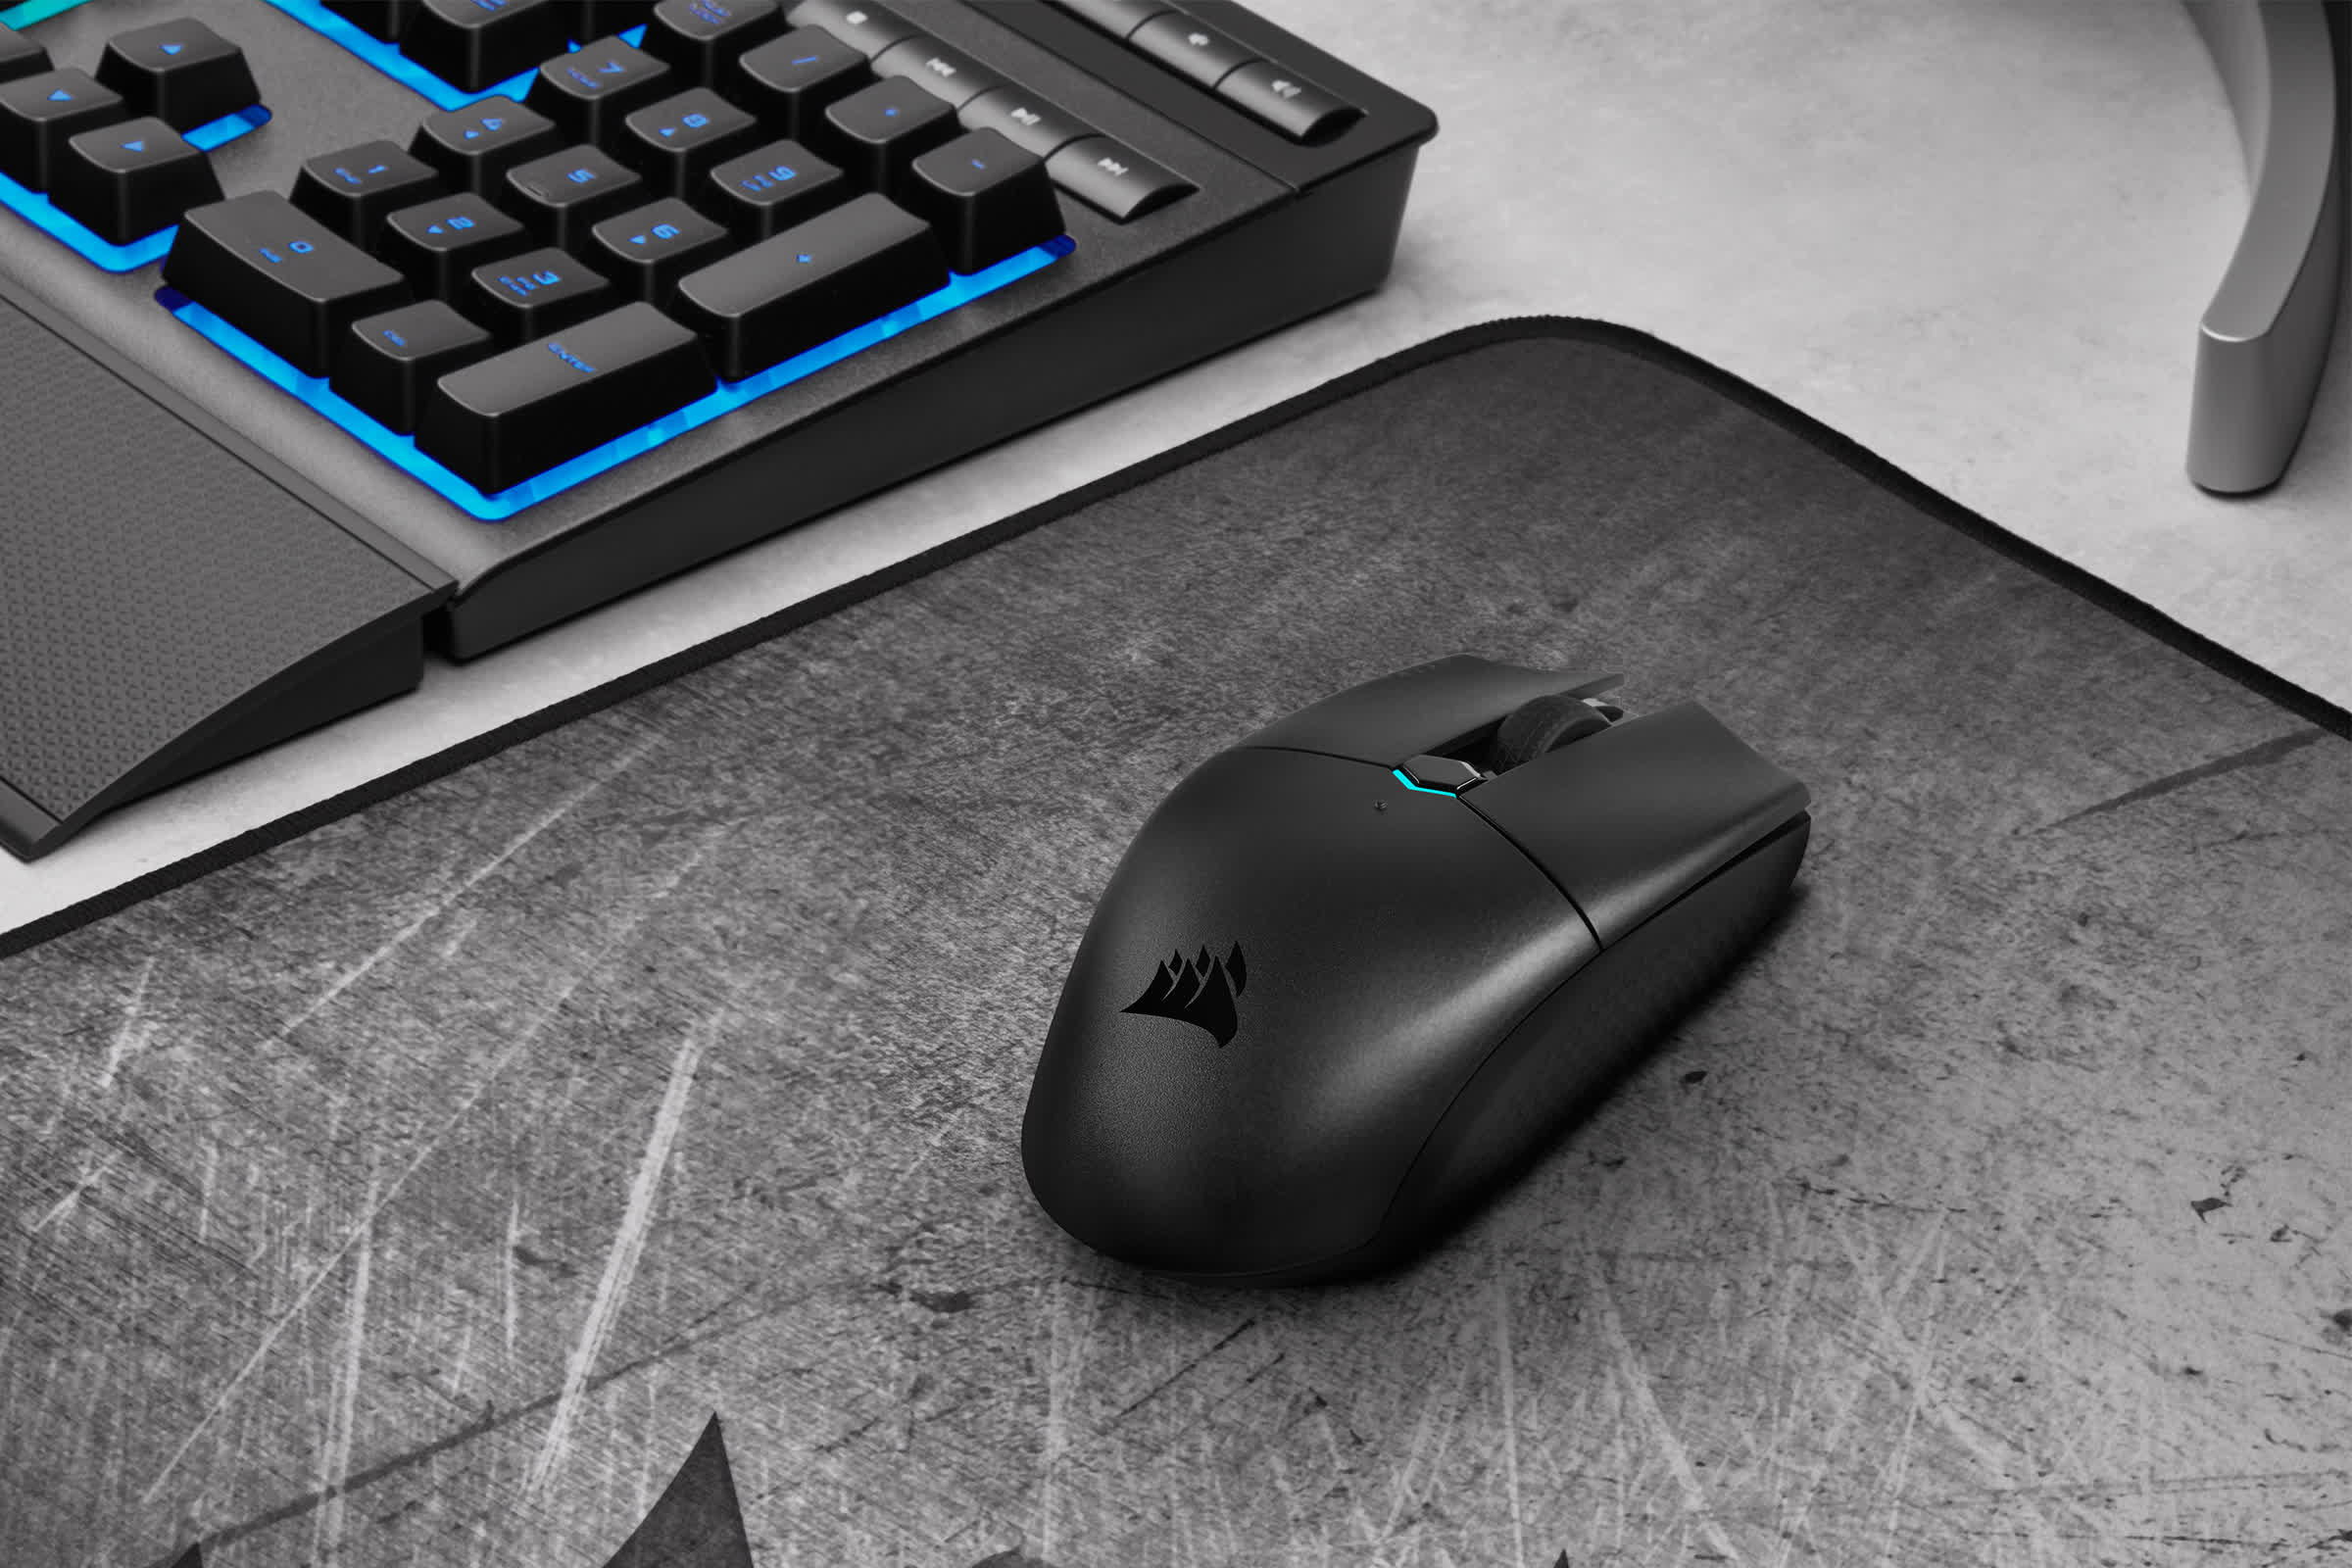 Corsair adds two new entry-level mice to its gaming lineup